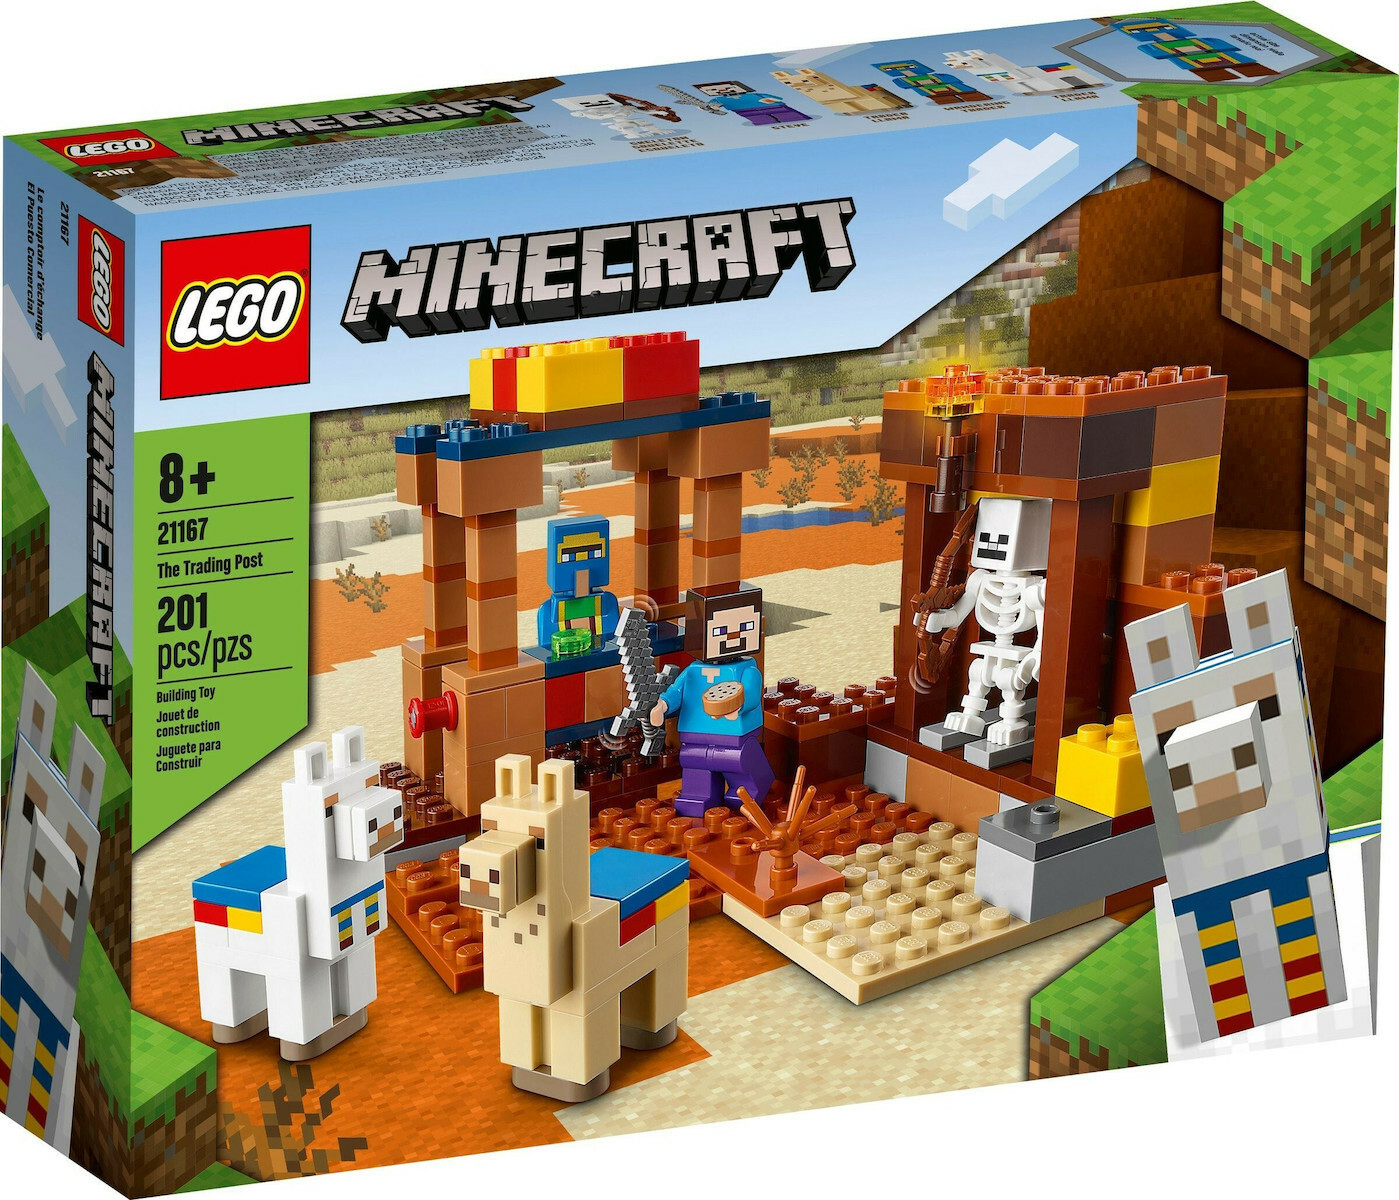 LEGO MINECRAFT 21167 THE TRADING POST